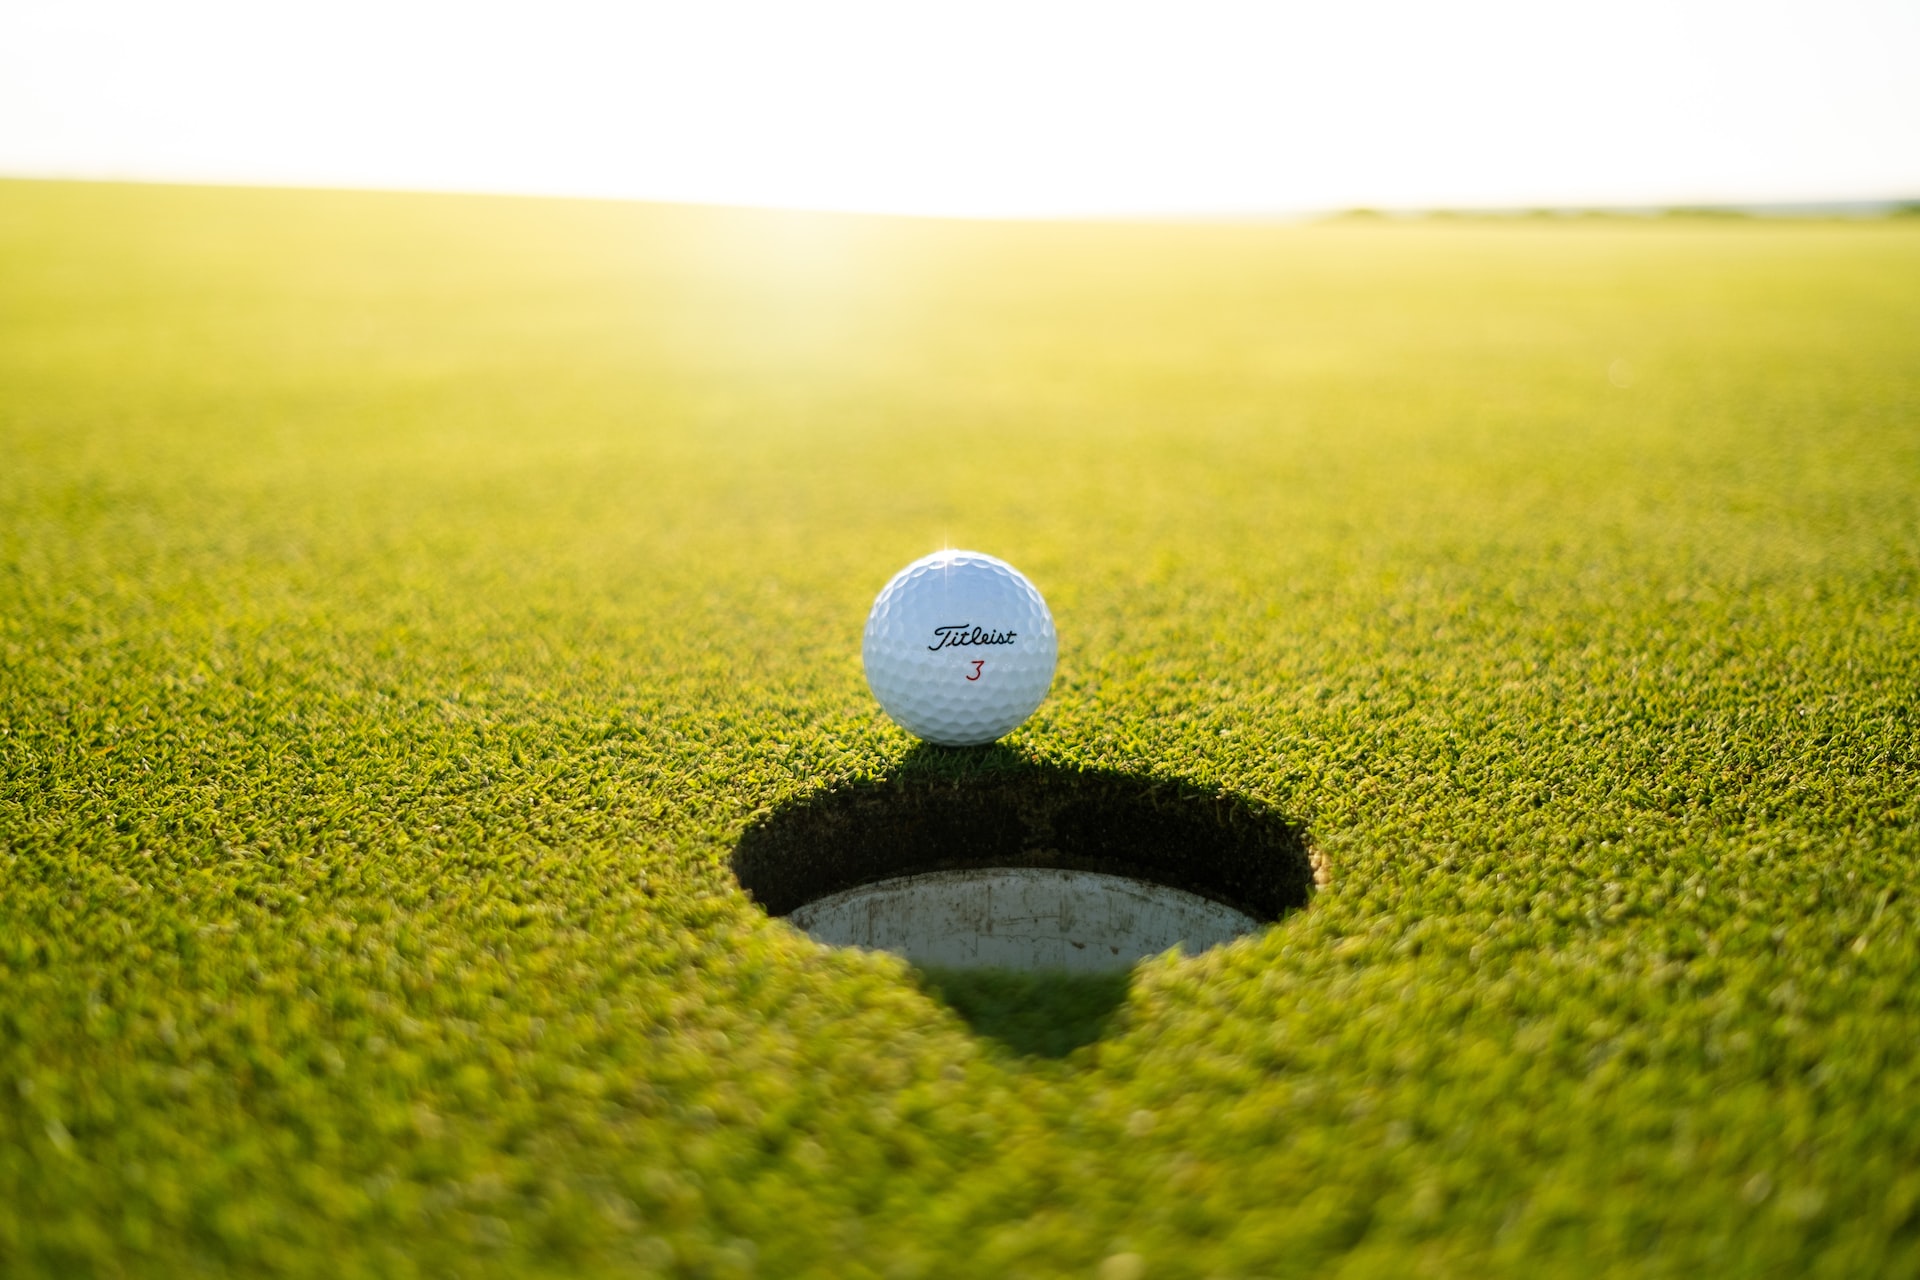 Betting on Golf: Best Golf Betting Sites in Canada